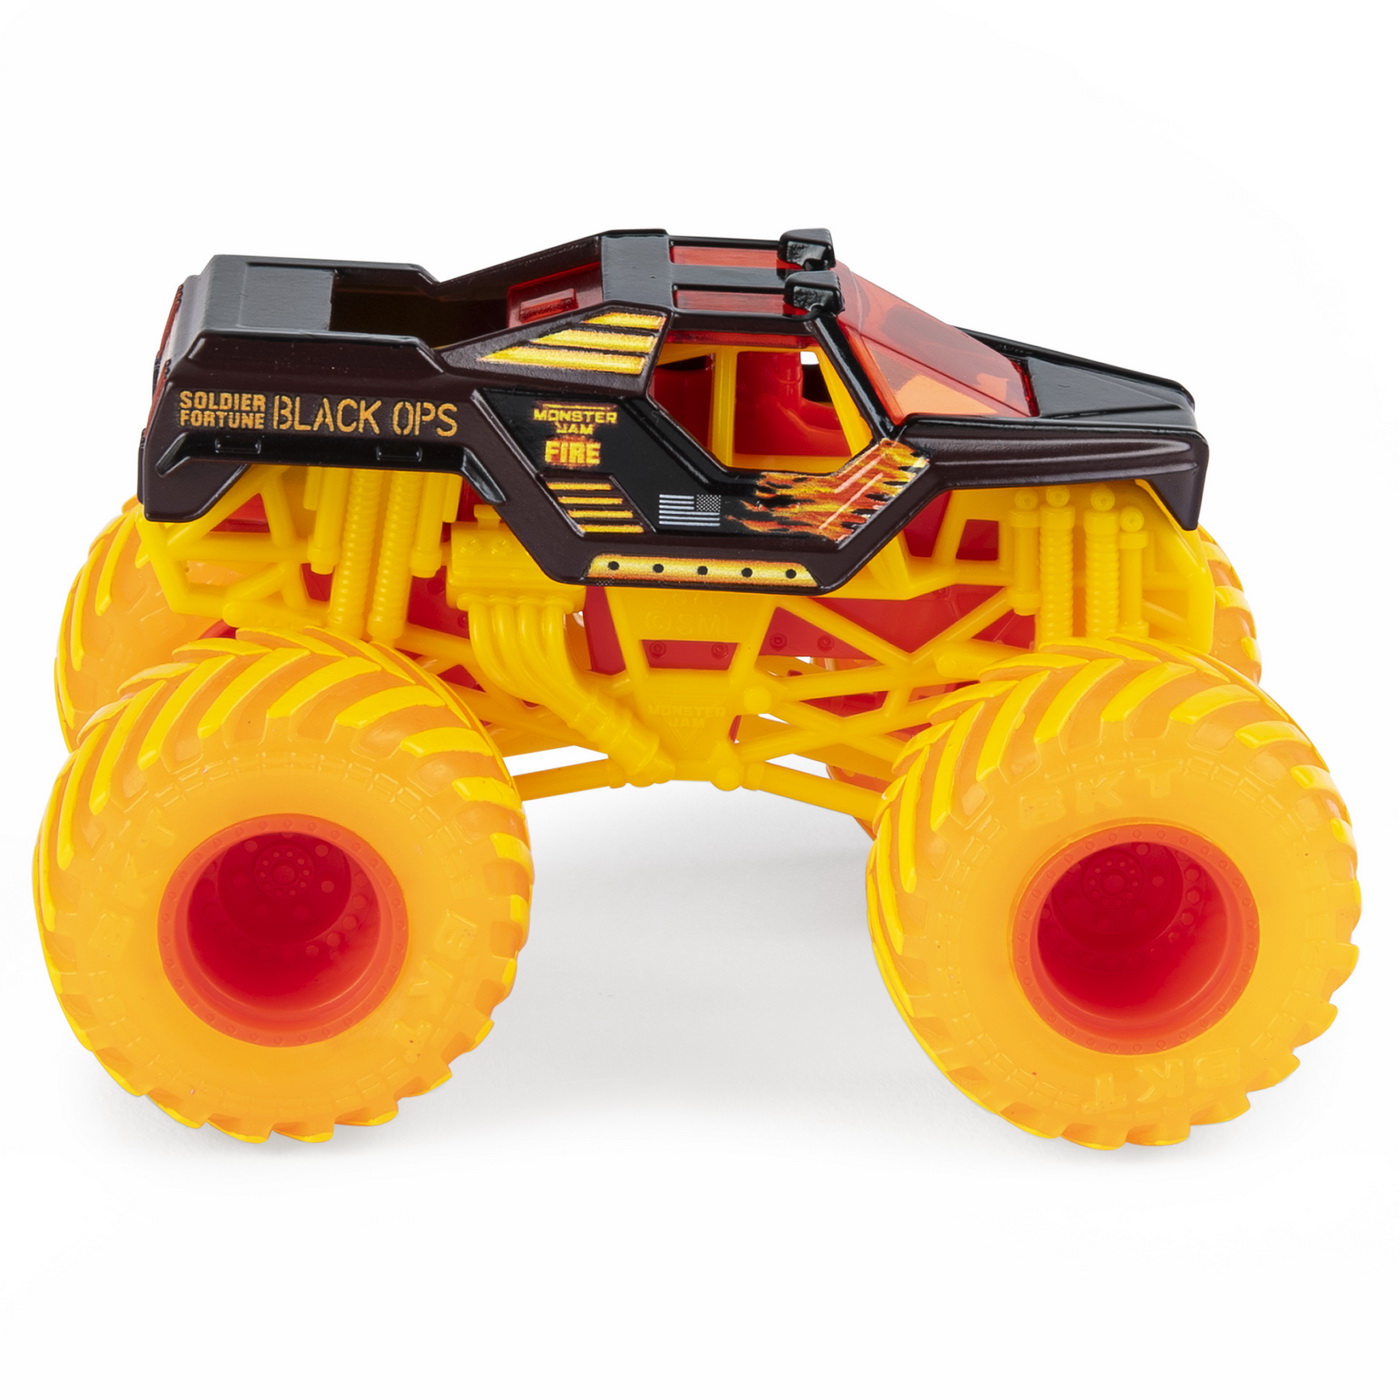 Masinuta Metalica Fire and Ice Soldier Fortune Black OPS | Monster Jam - 1